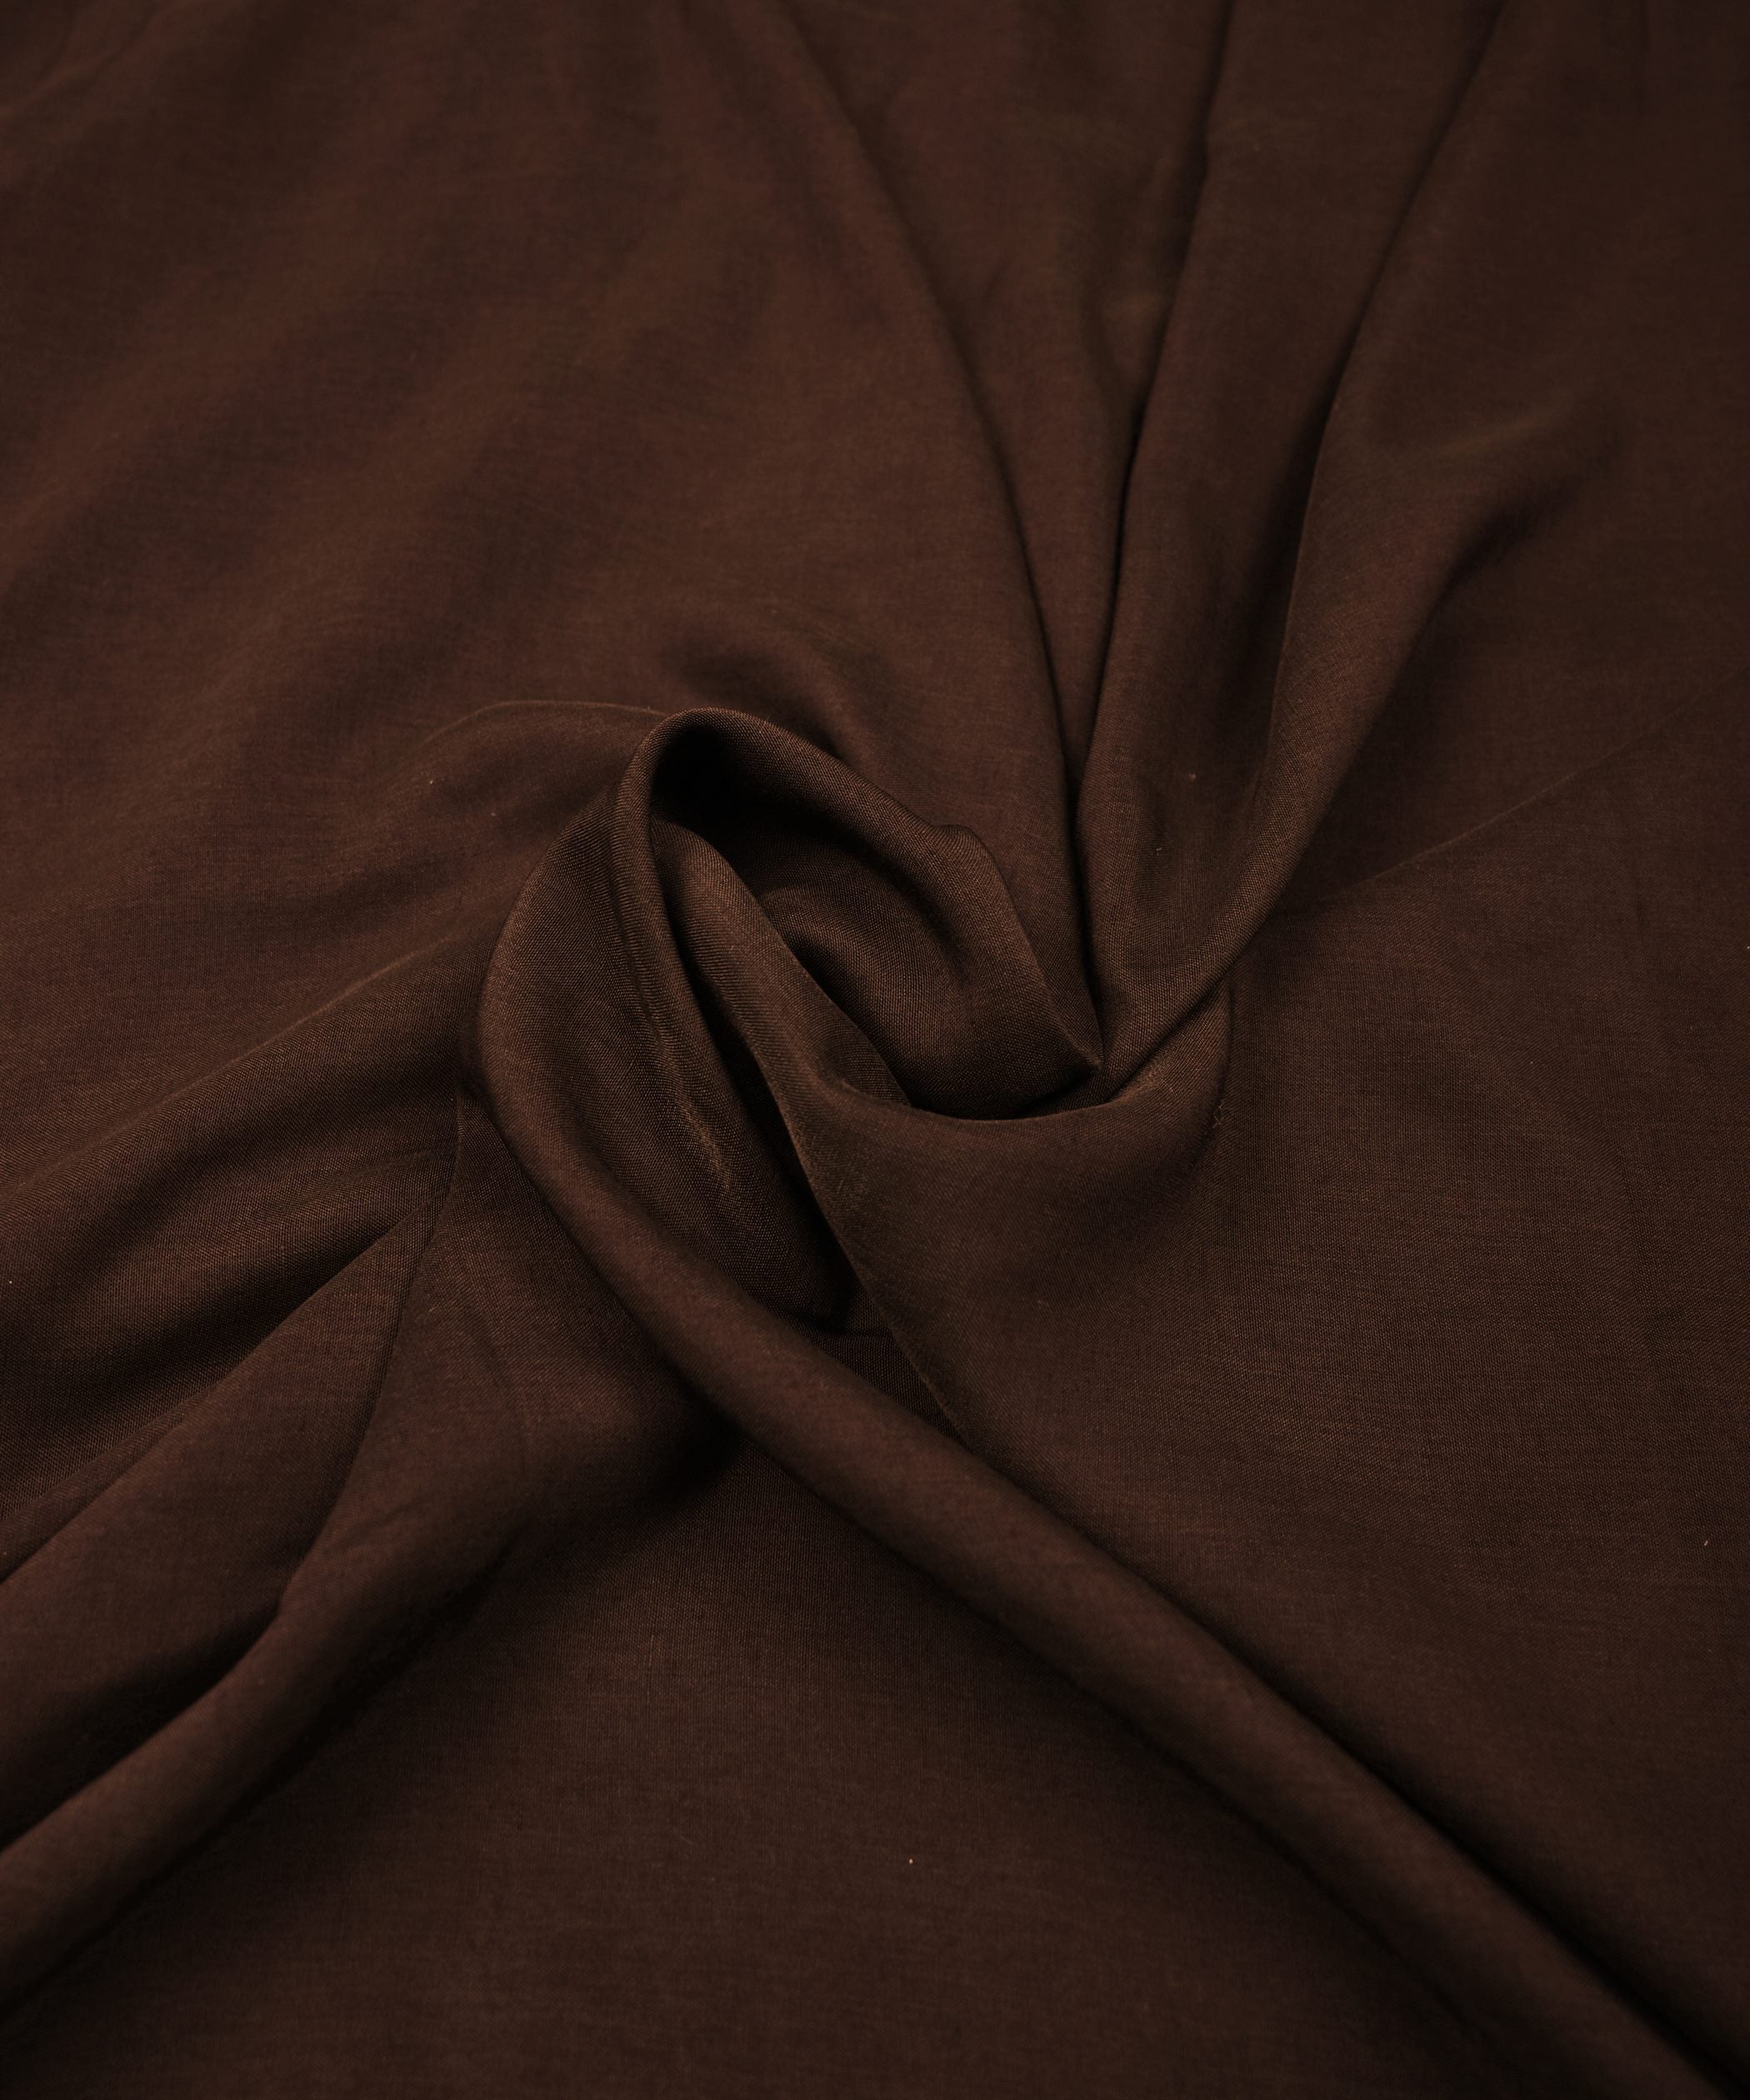 Coffee Brown Plain Dyed Polyester Muslin Fabric